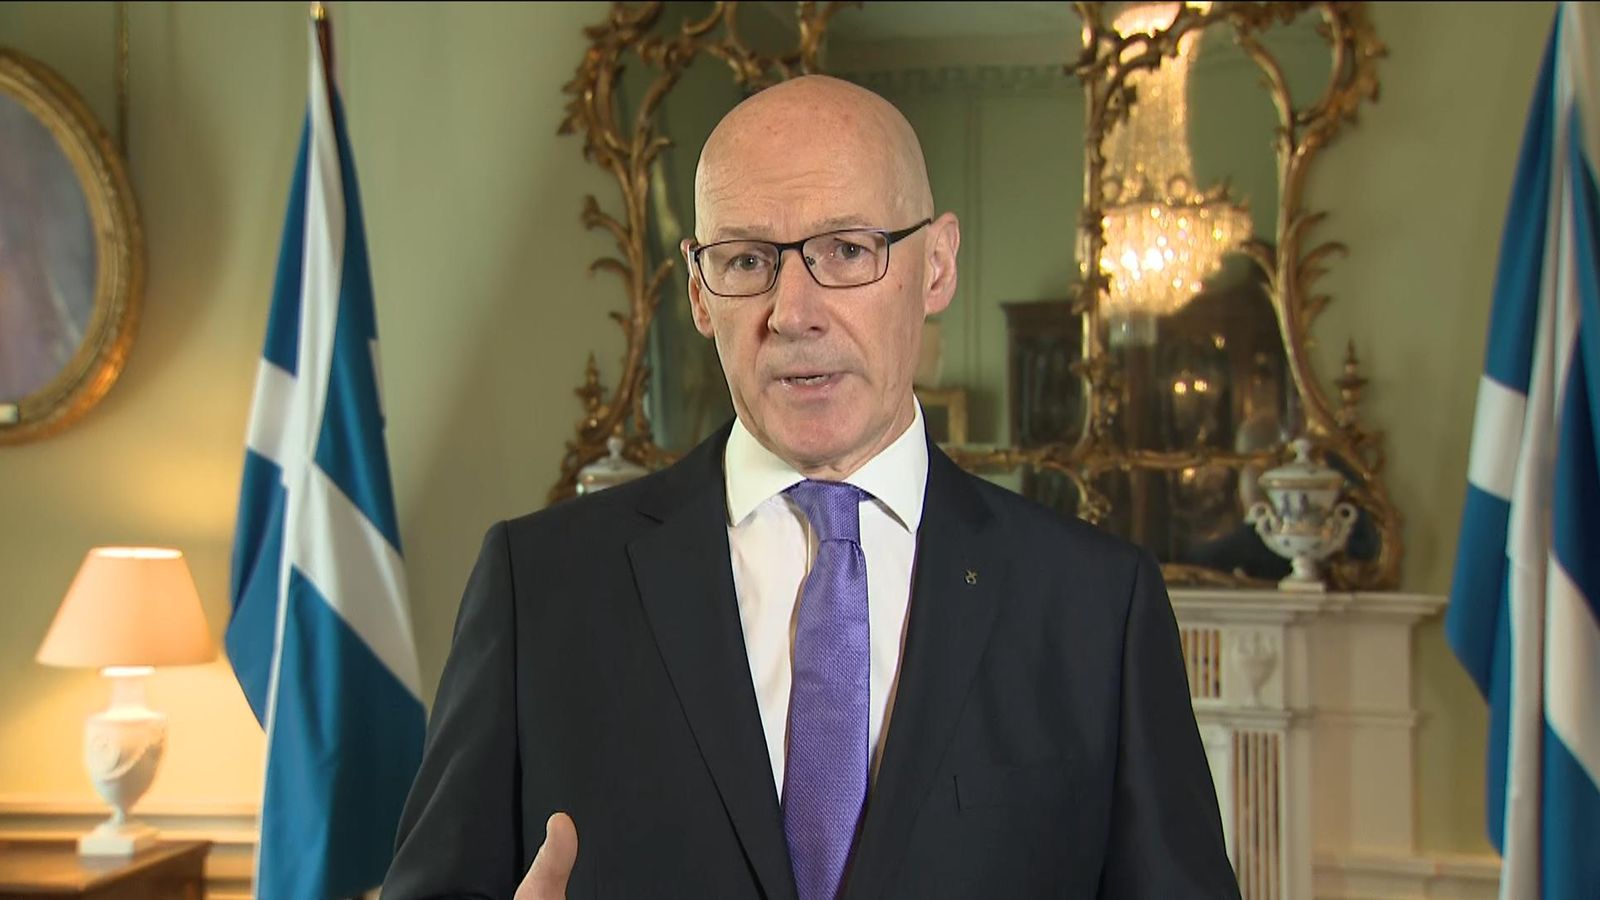 Scotland could be independent in five years, First Minister John Swinney says